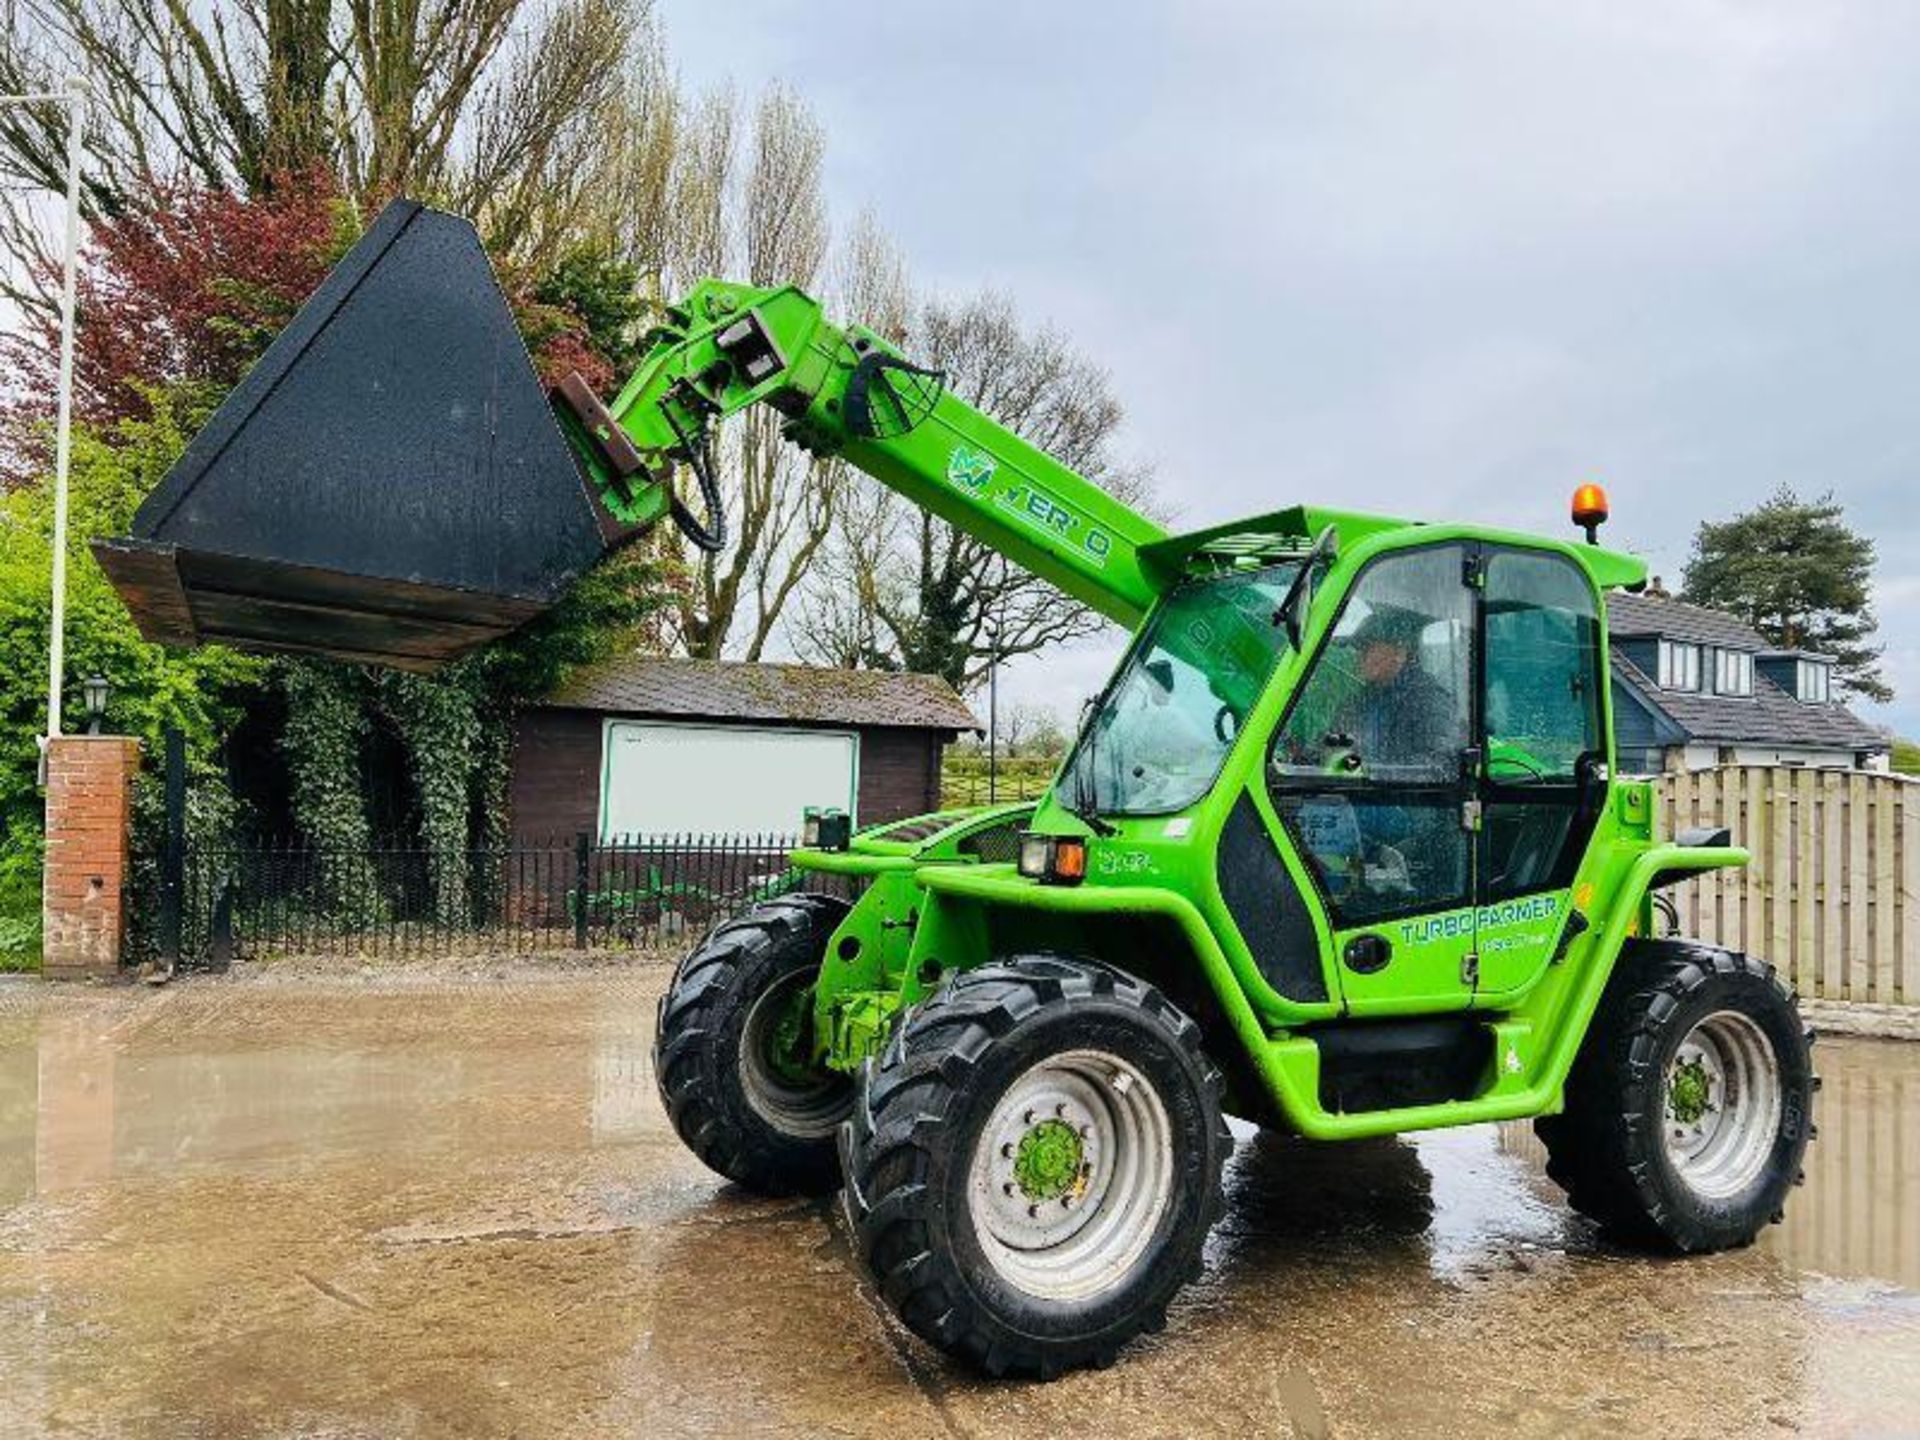 MERLO P34.7 4WD TELEHANDLER*YEAR 2013, AG SPEC* C/W PICK UP HITCH - Image 7 of 20